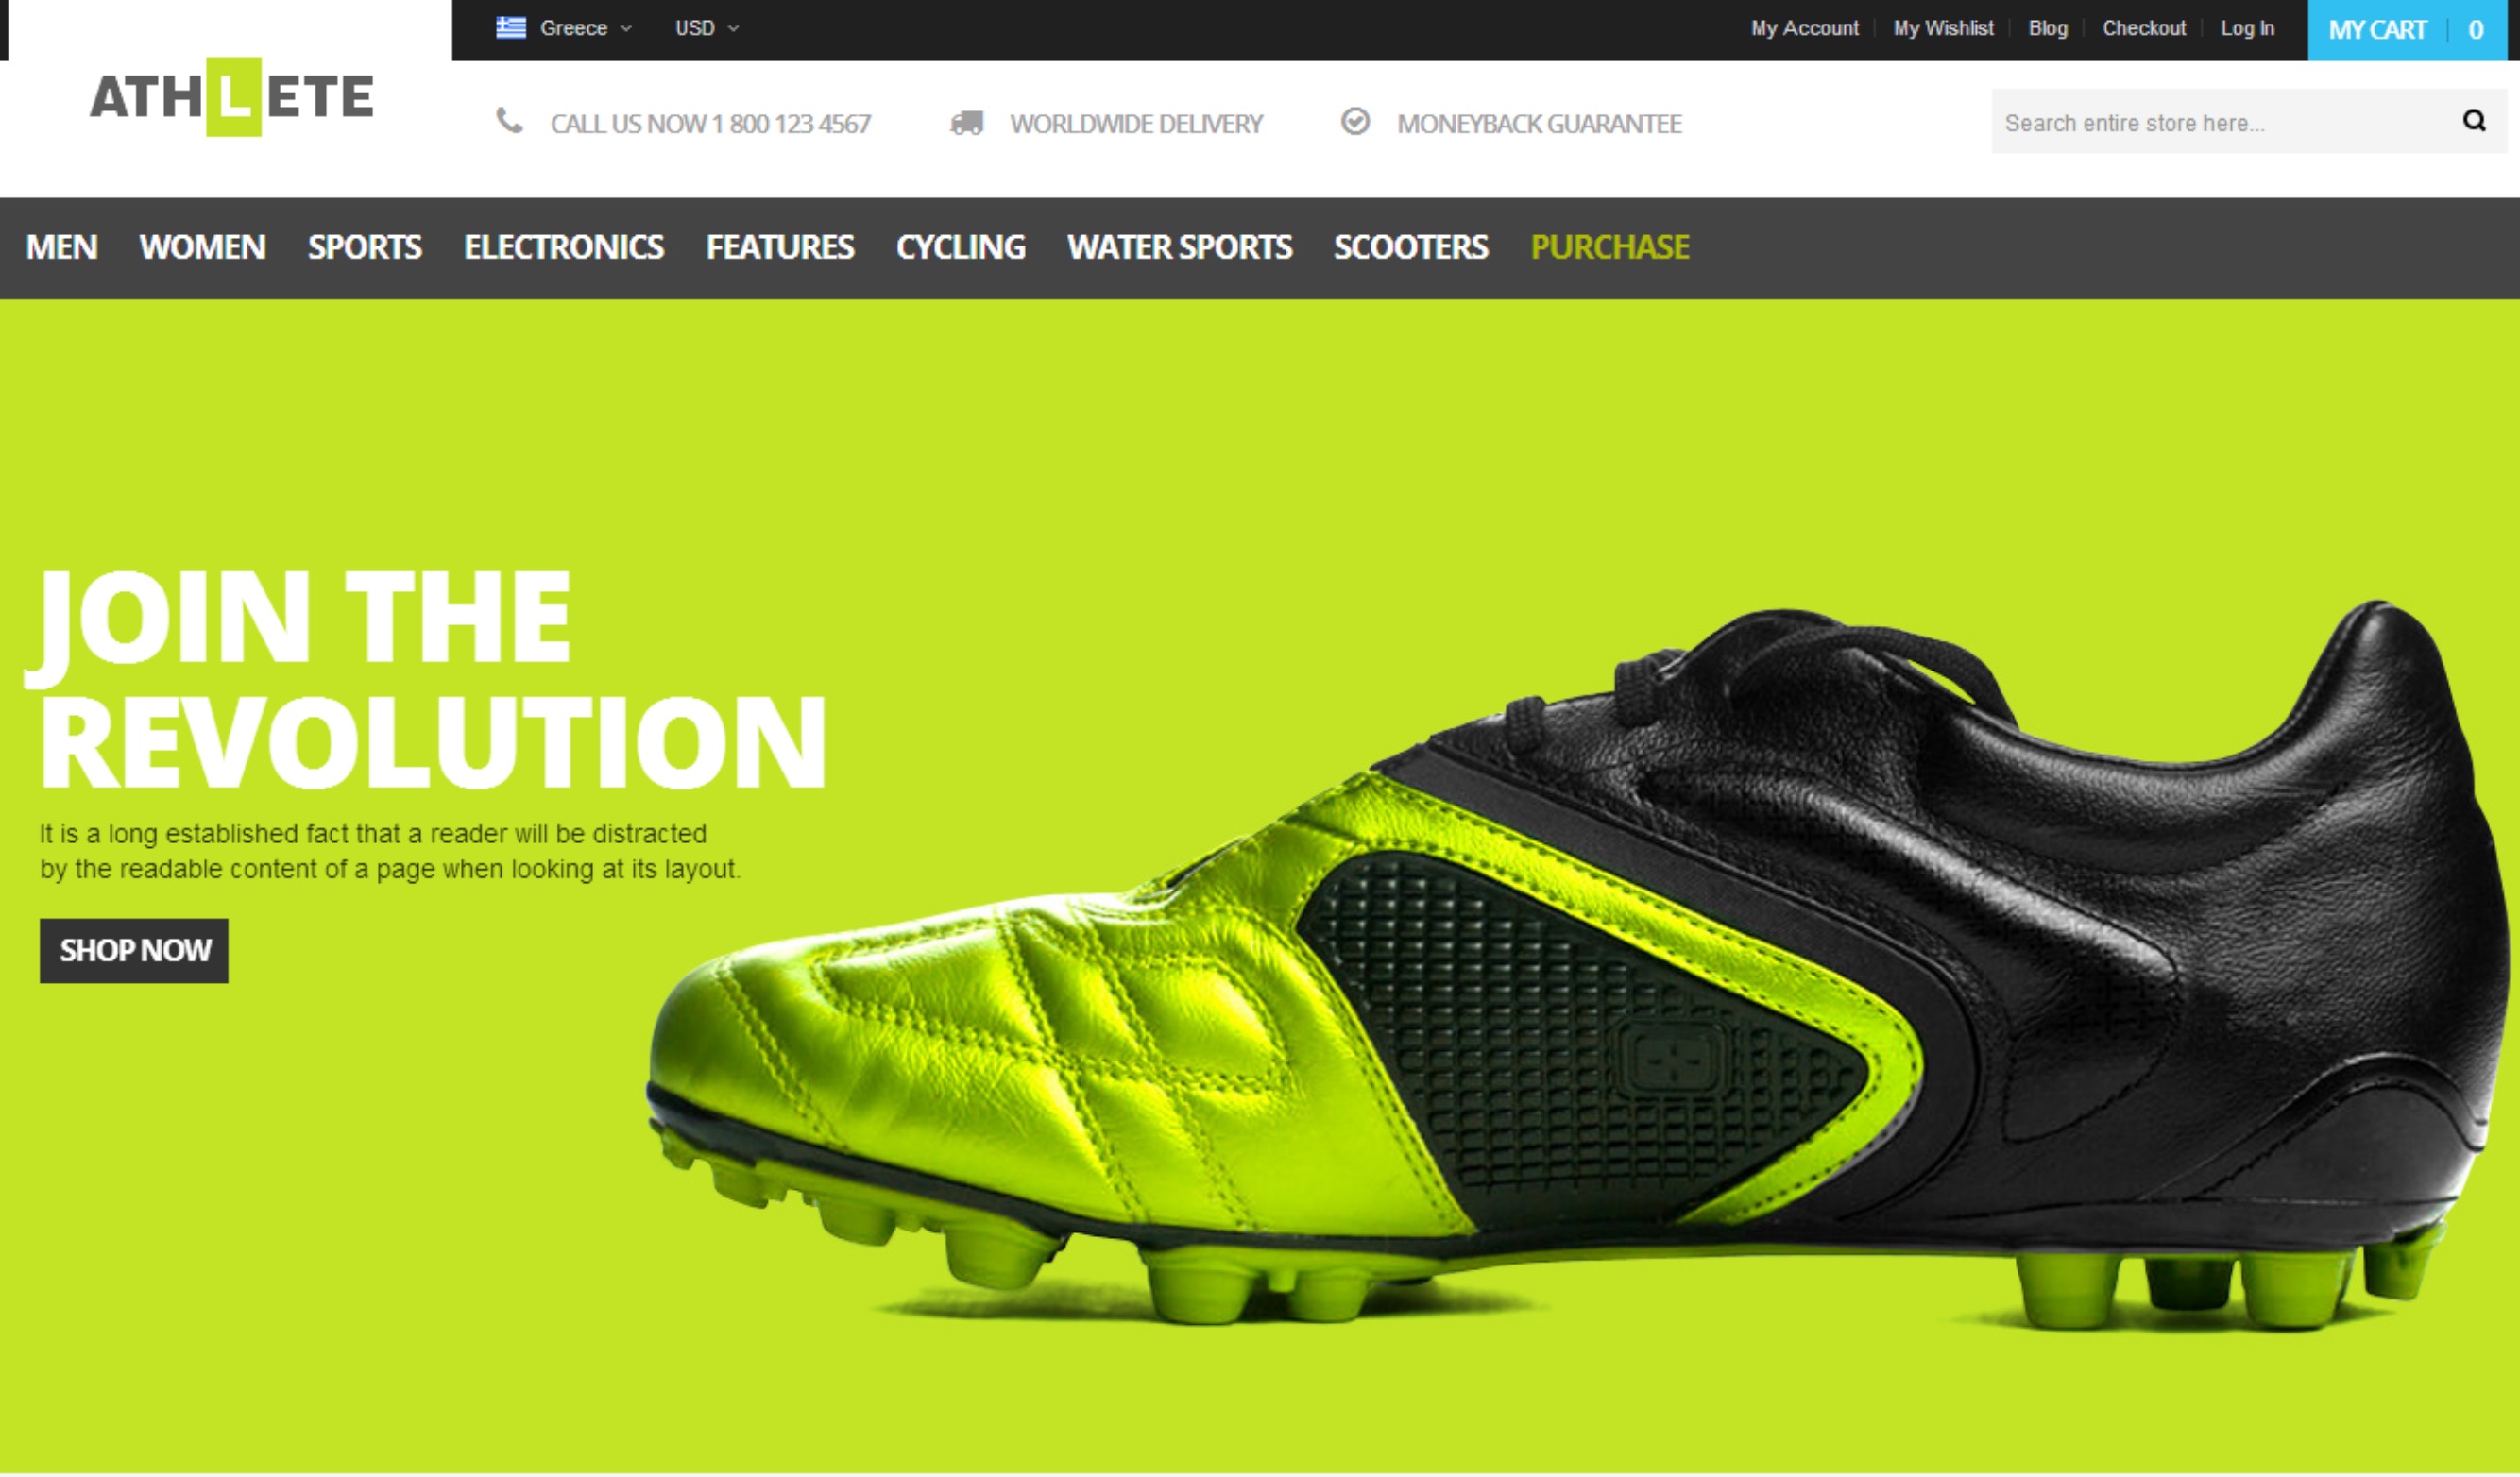 The Athlete – A Fluidly Responsive Template